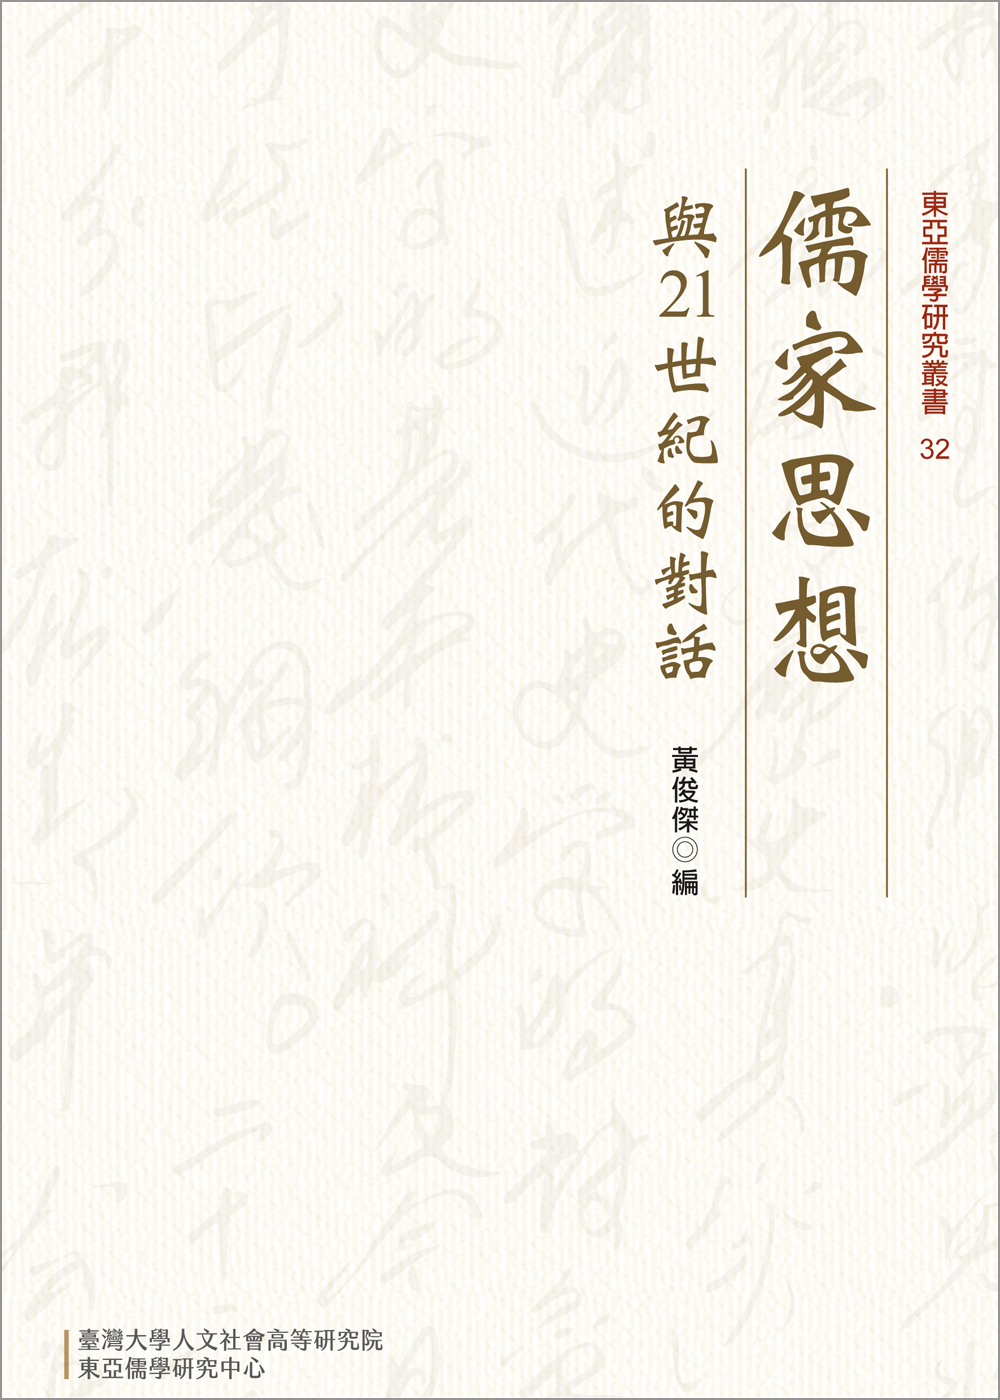 Dialogue between Confucianism and the 21st Century